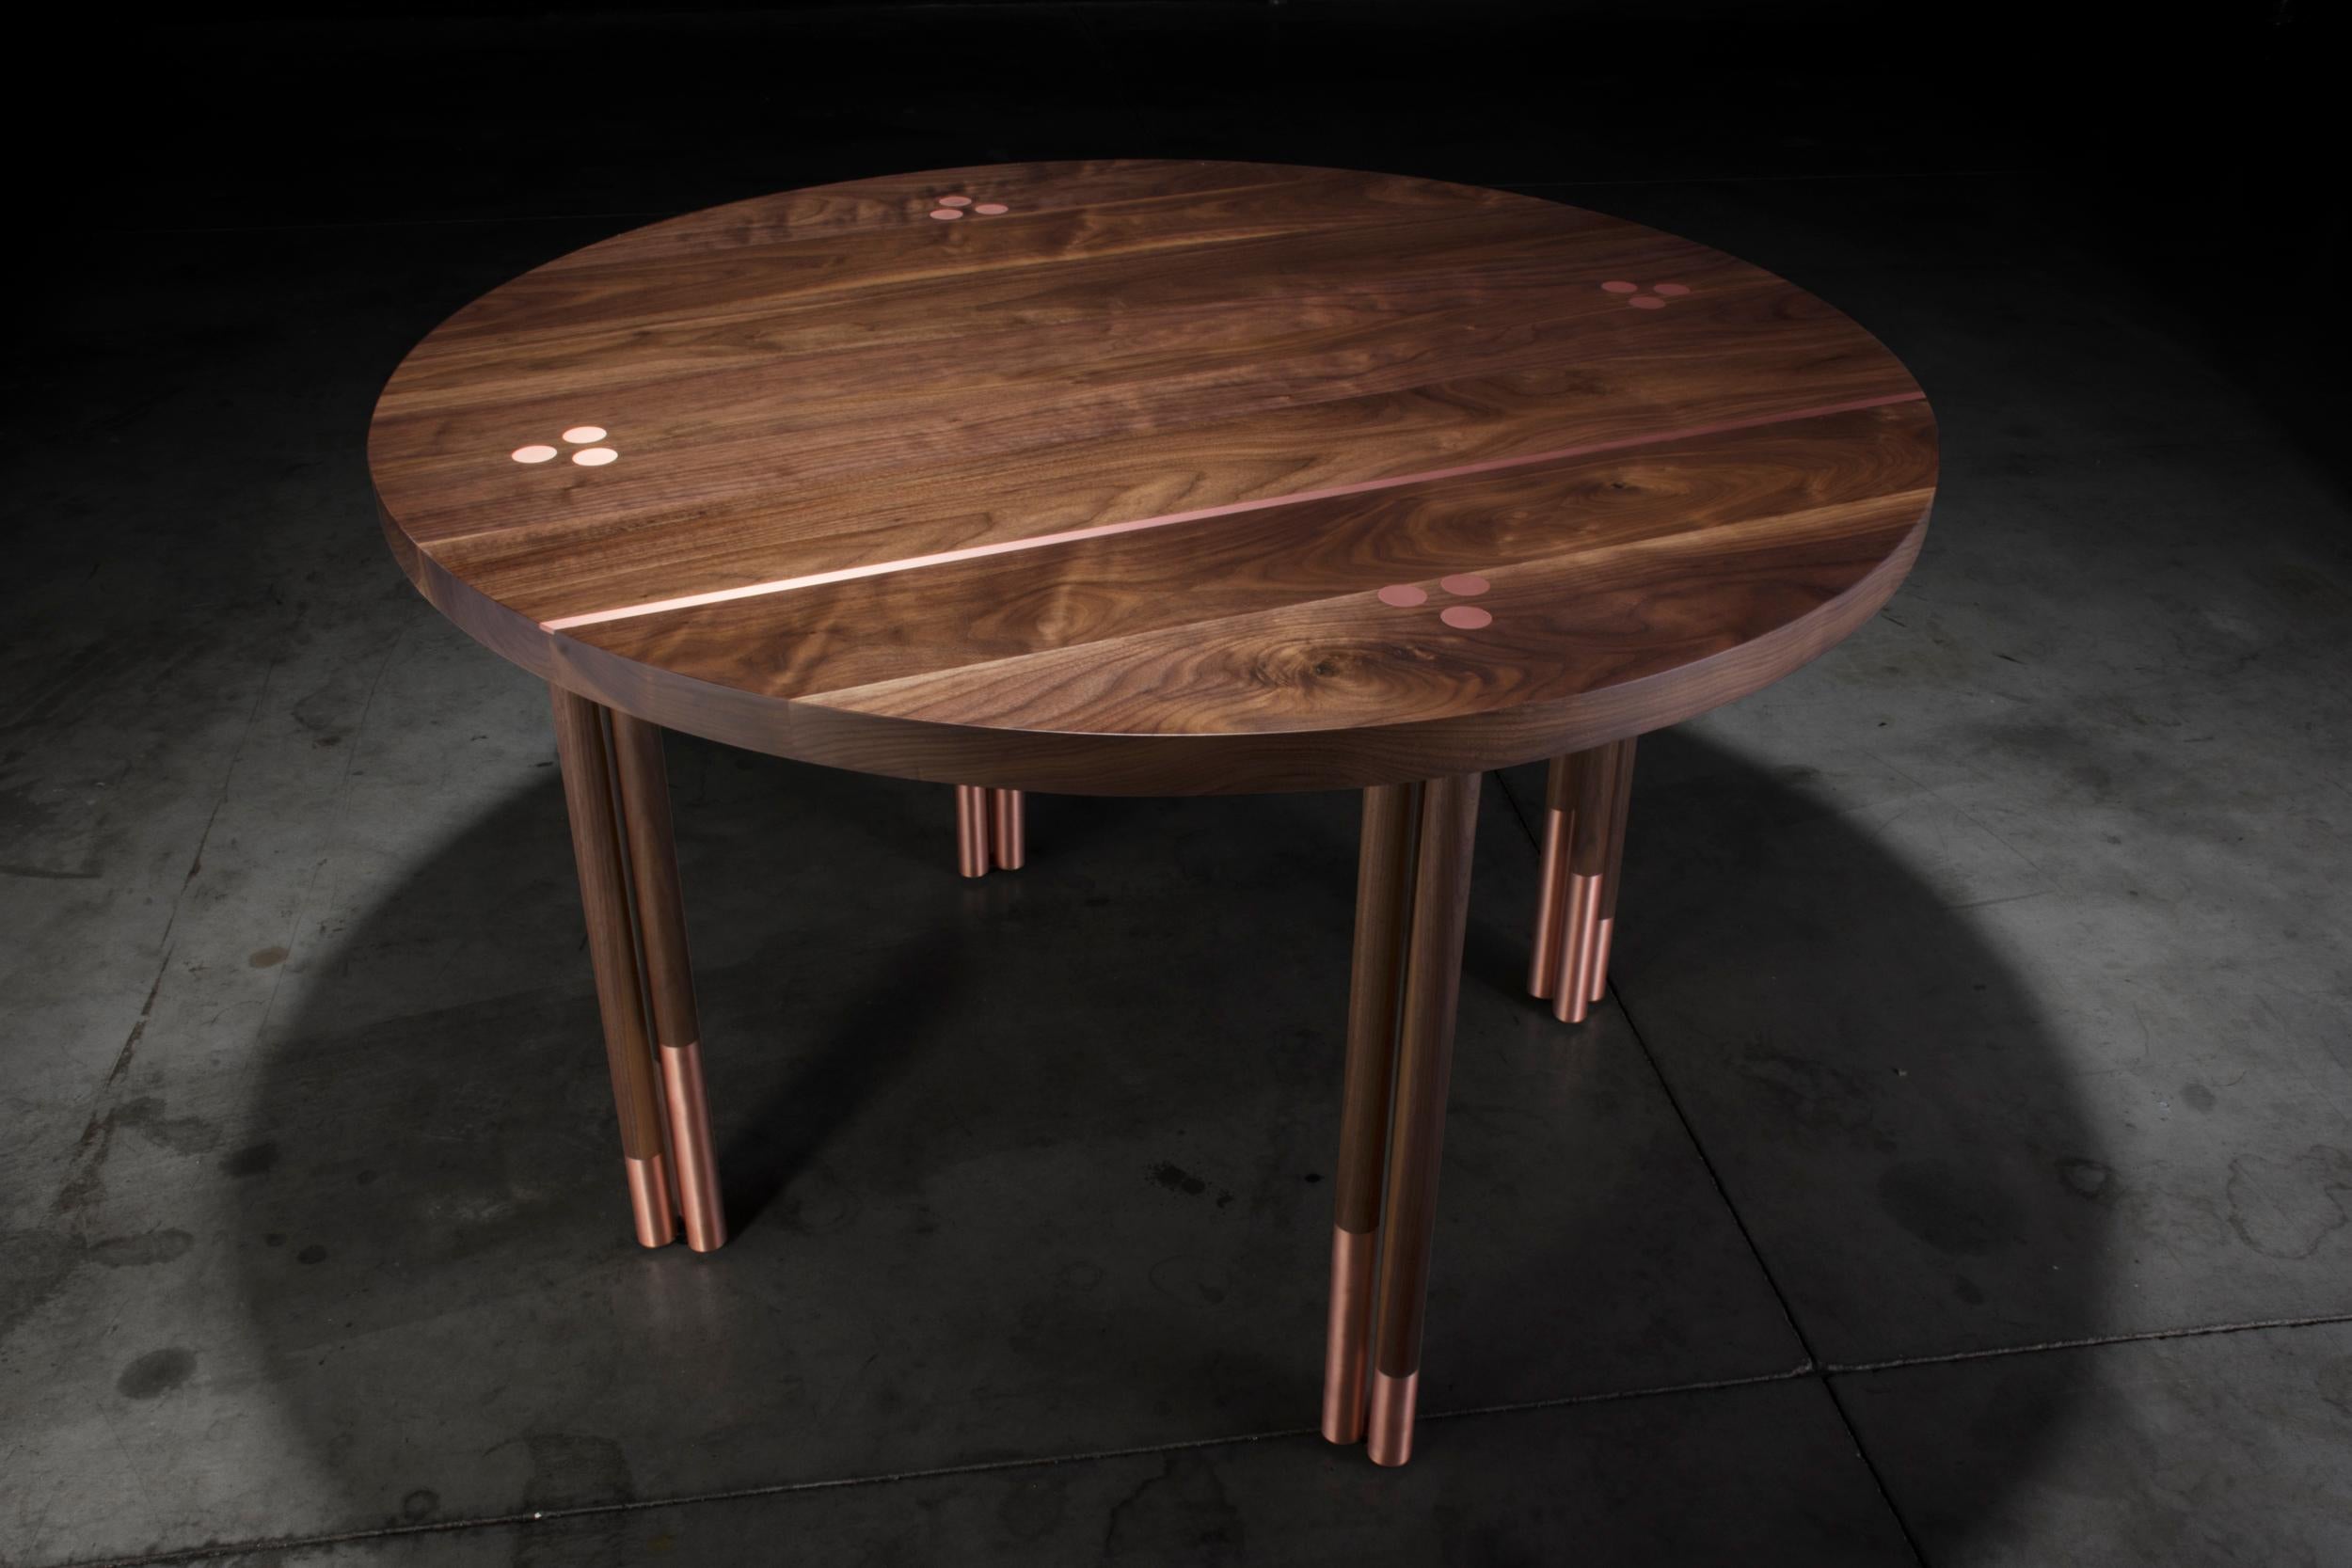 copper inlay table